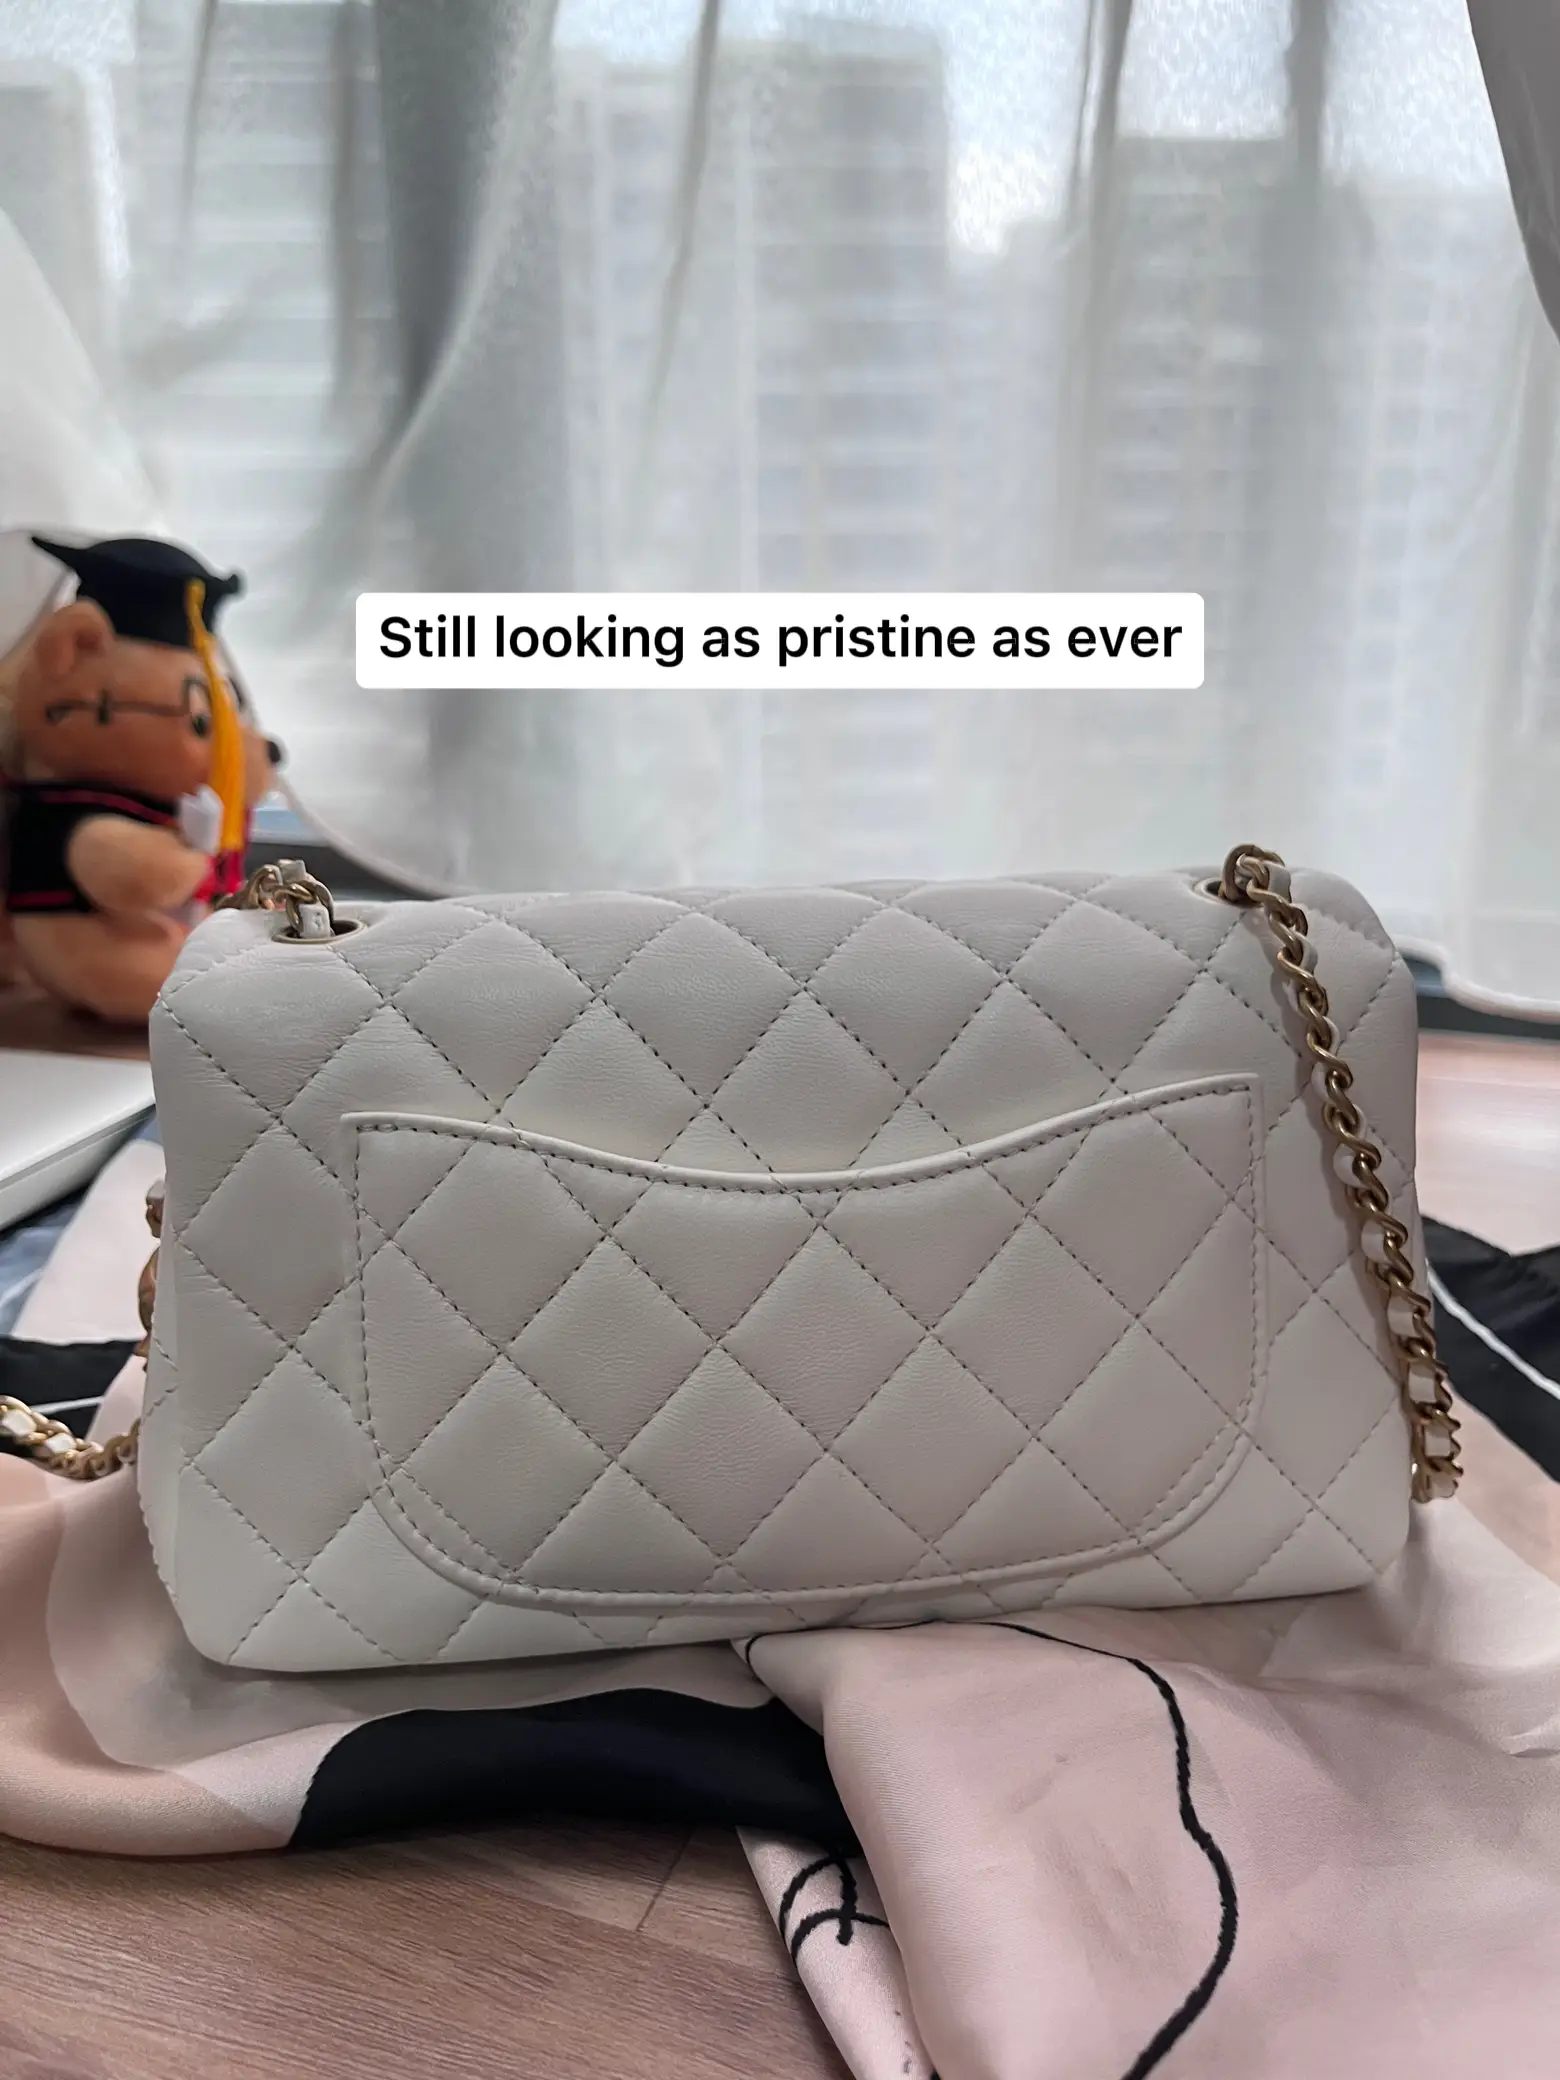 What is the price of the Chanel Mini Flap Bag that Cardi B received as a  gift from Latto? - Quora